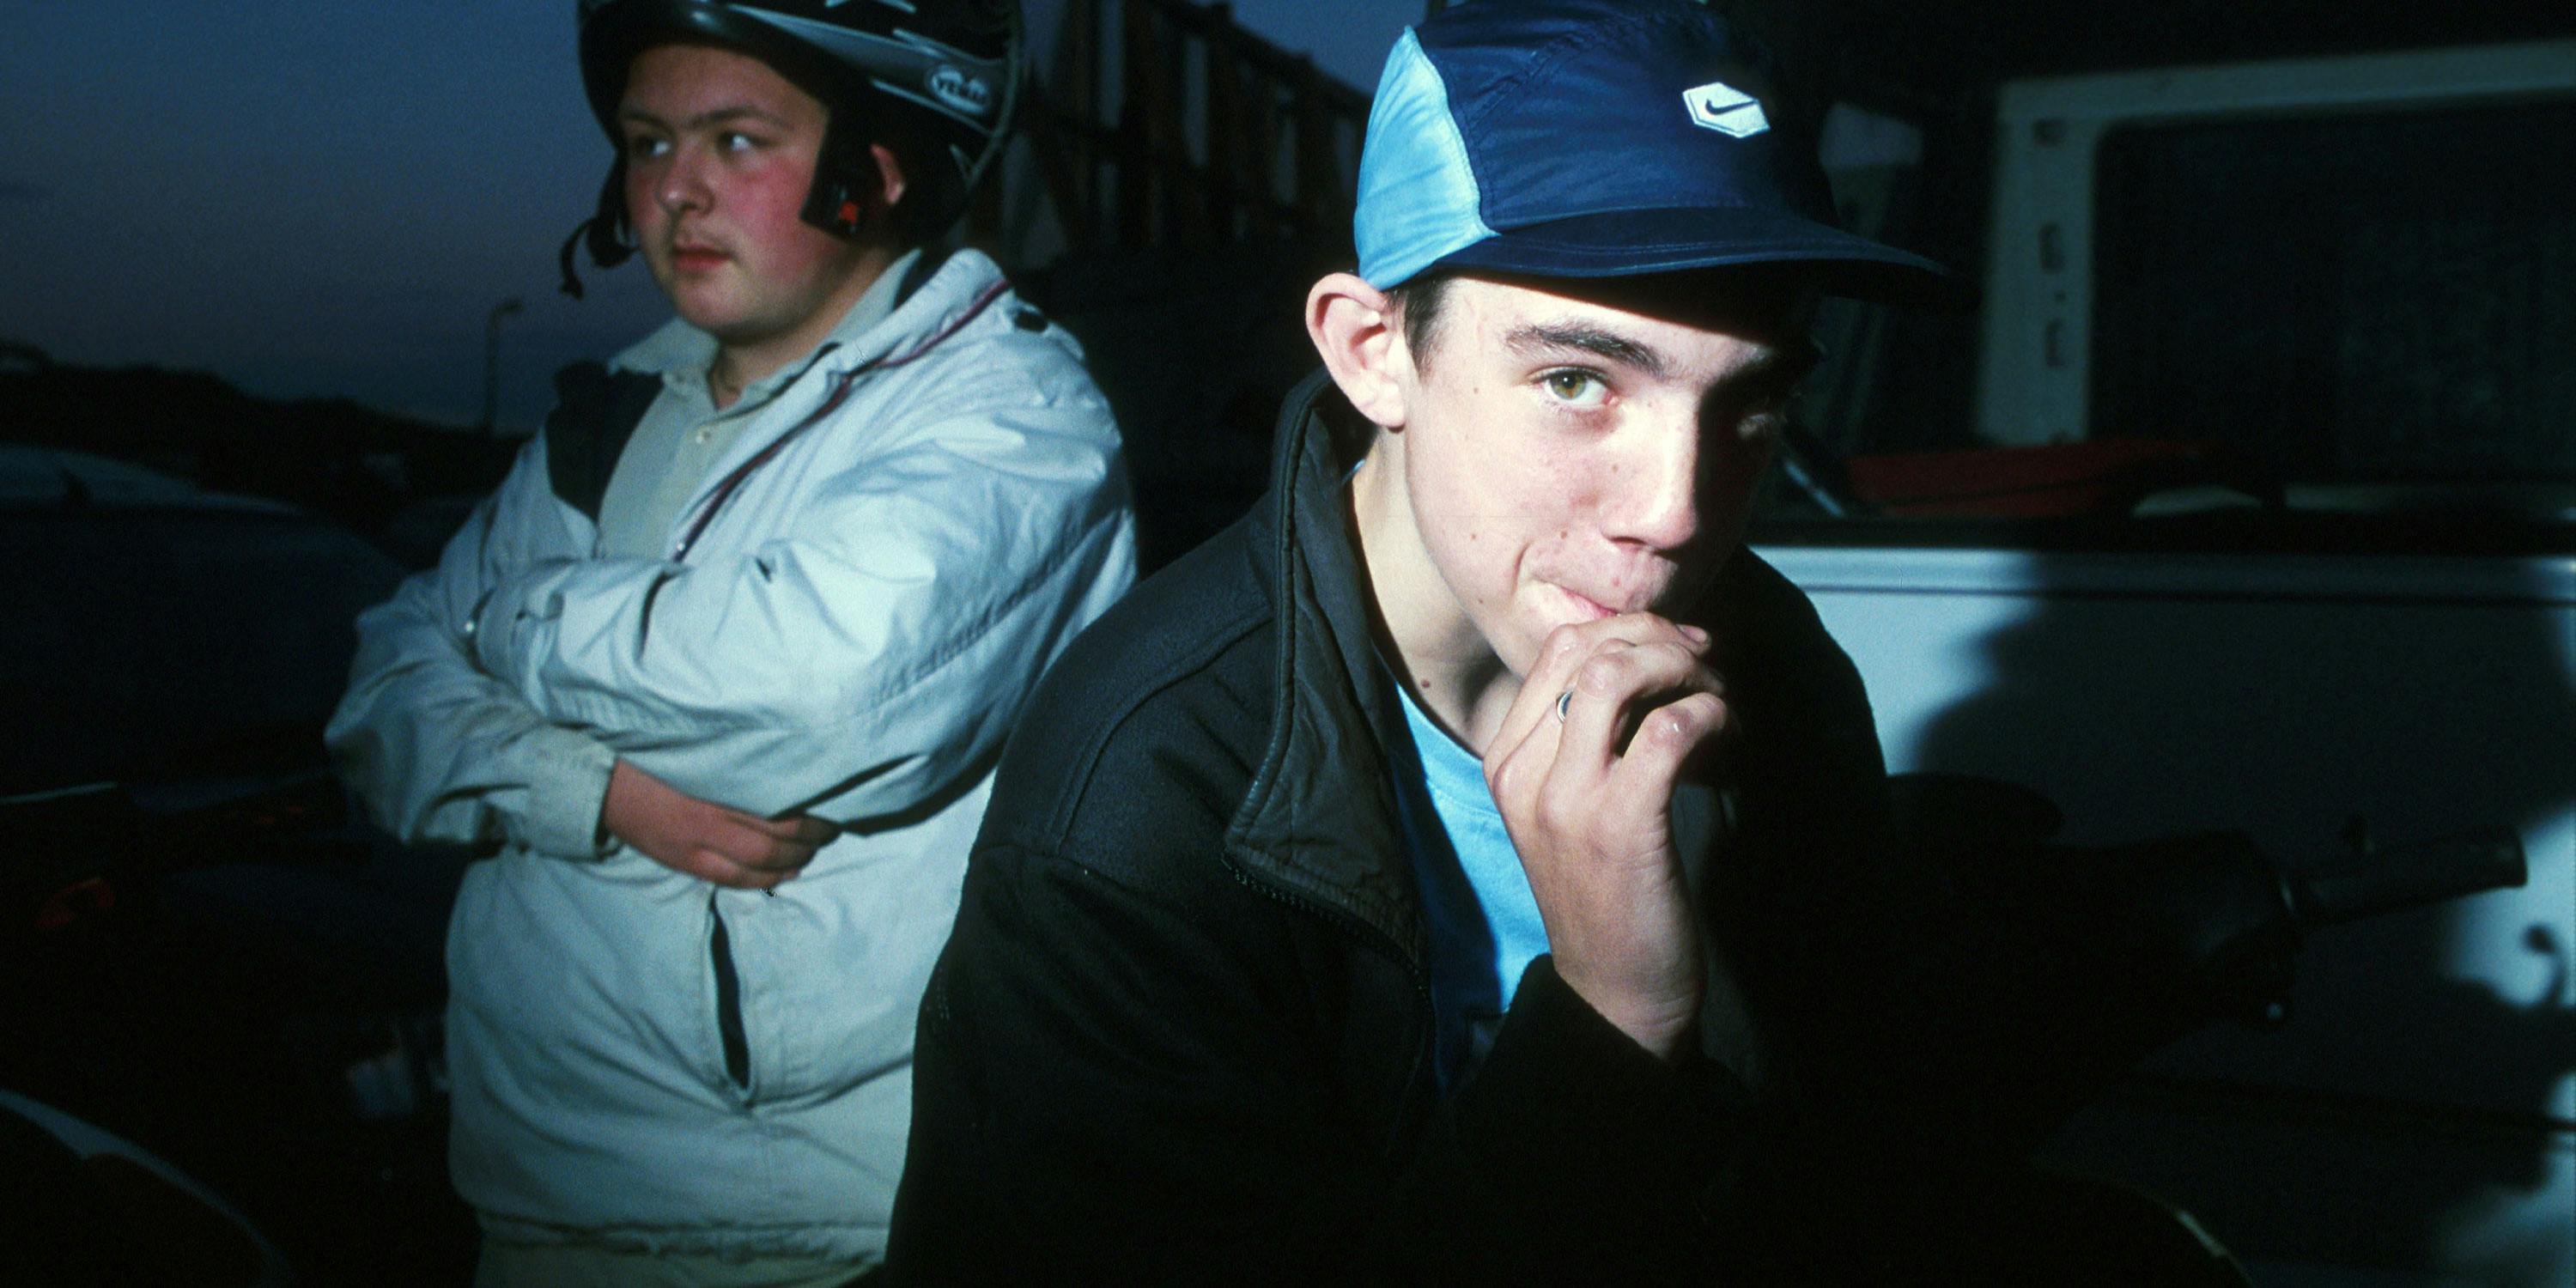 A teenage scooter boy smoking a spliff in Luton, UK in 2004. A new report found teens buy weed more easily than alcohol in the UK.